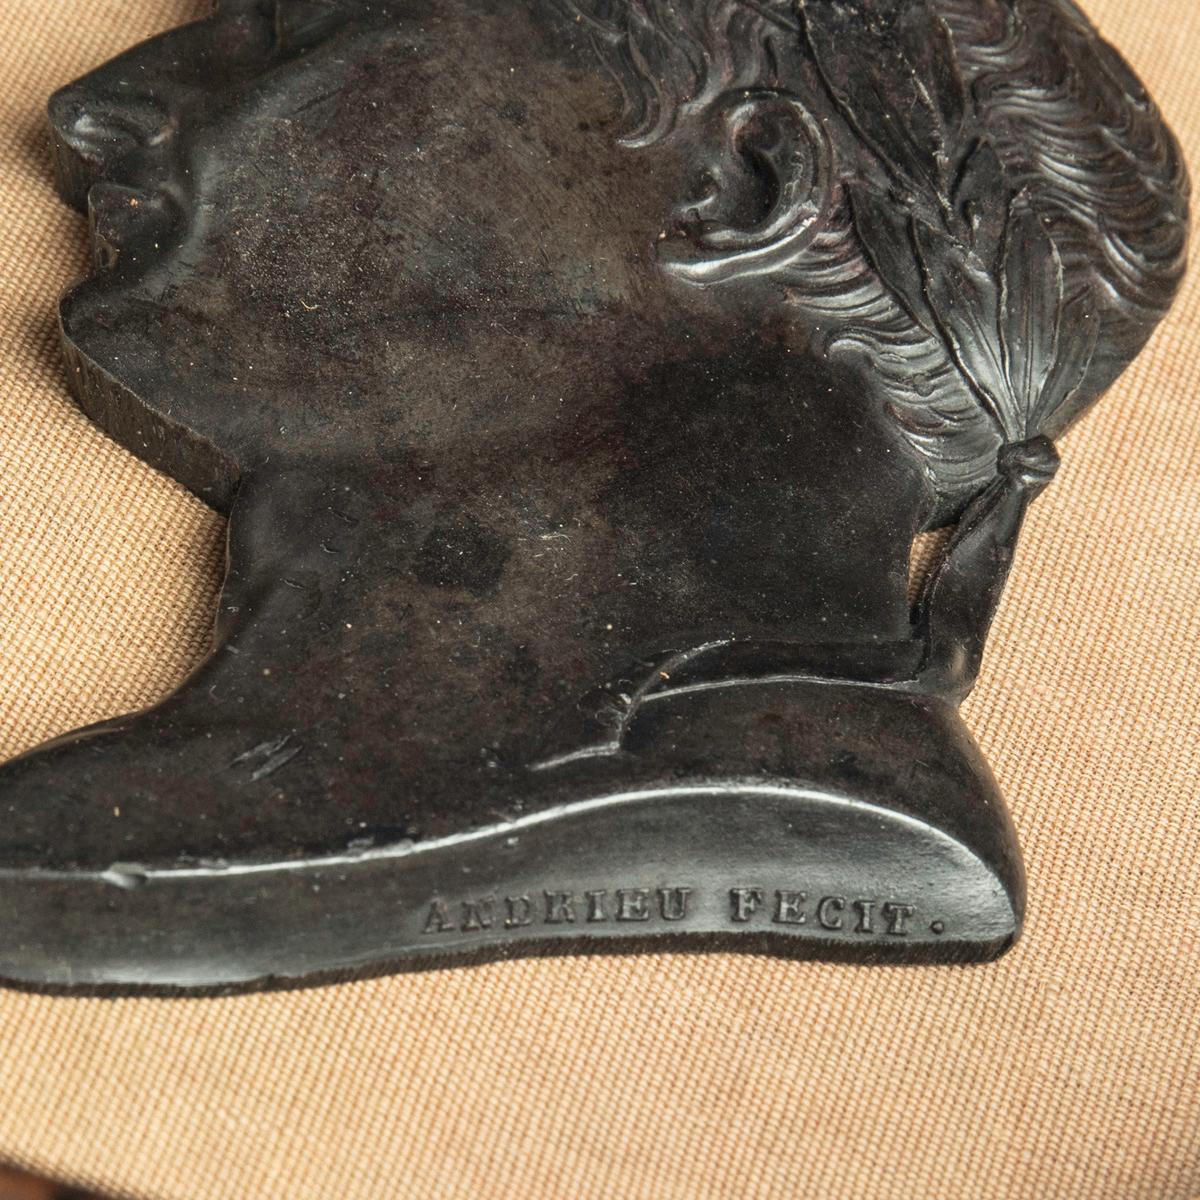 A bronze portrait of Emperor Napoleon Bonaparte, by Andrieu, showing Napoleon facing to the right and wearing the laurel garland of a Roman emperor, stamped Andrieu Fecit (Andrieu made it), in an oval frame.  The paper label on the reverse stating